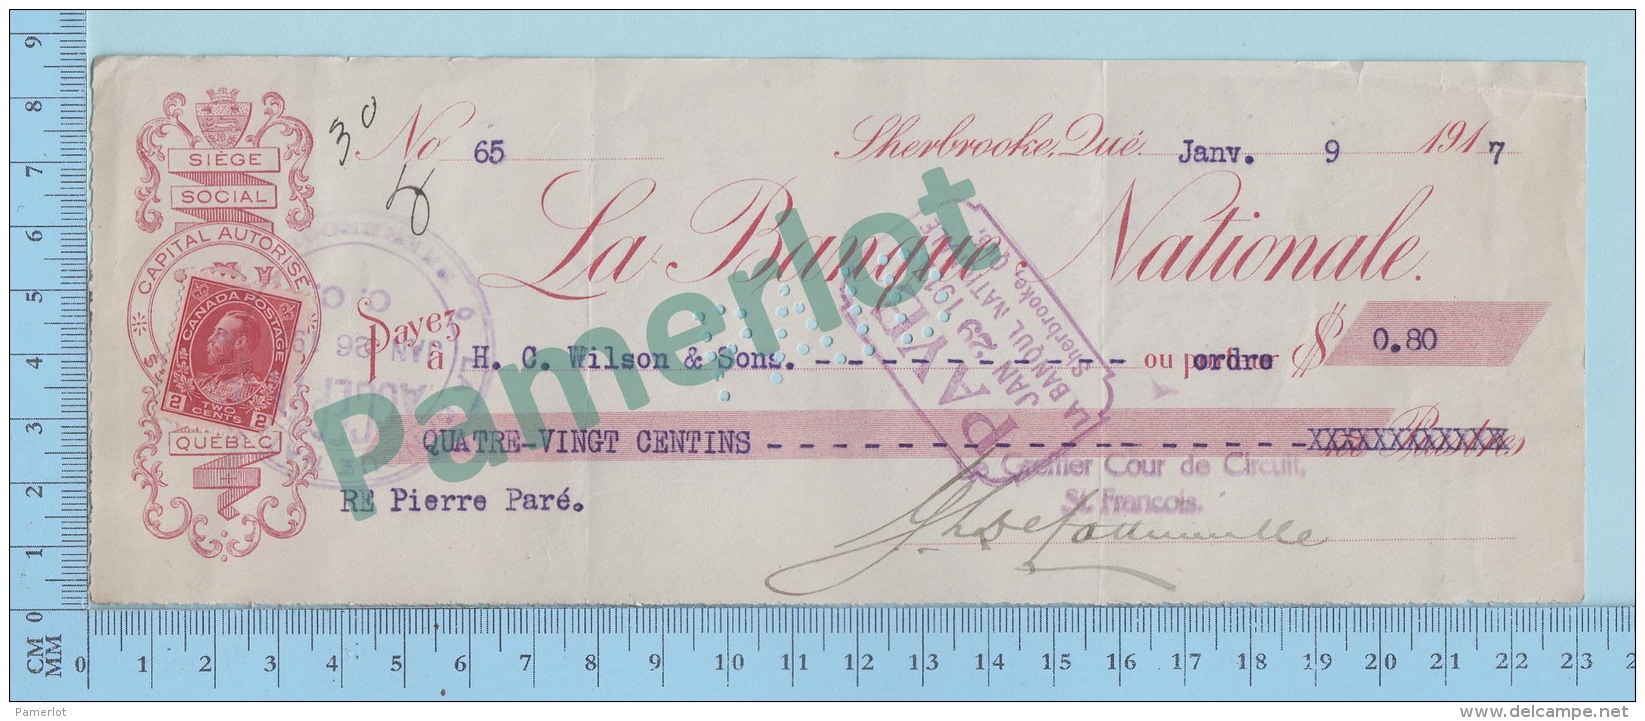 Cheque Timbre Taxe -  H. C. Wilson &amp; Sons , Sherbrooke Quebec 1917, $ 0.80 - 2 Scans - Cheques & Traveler's Cheques